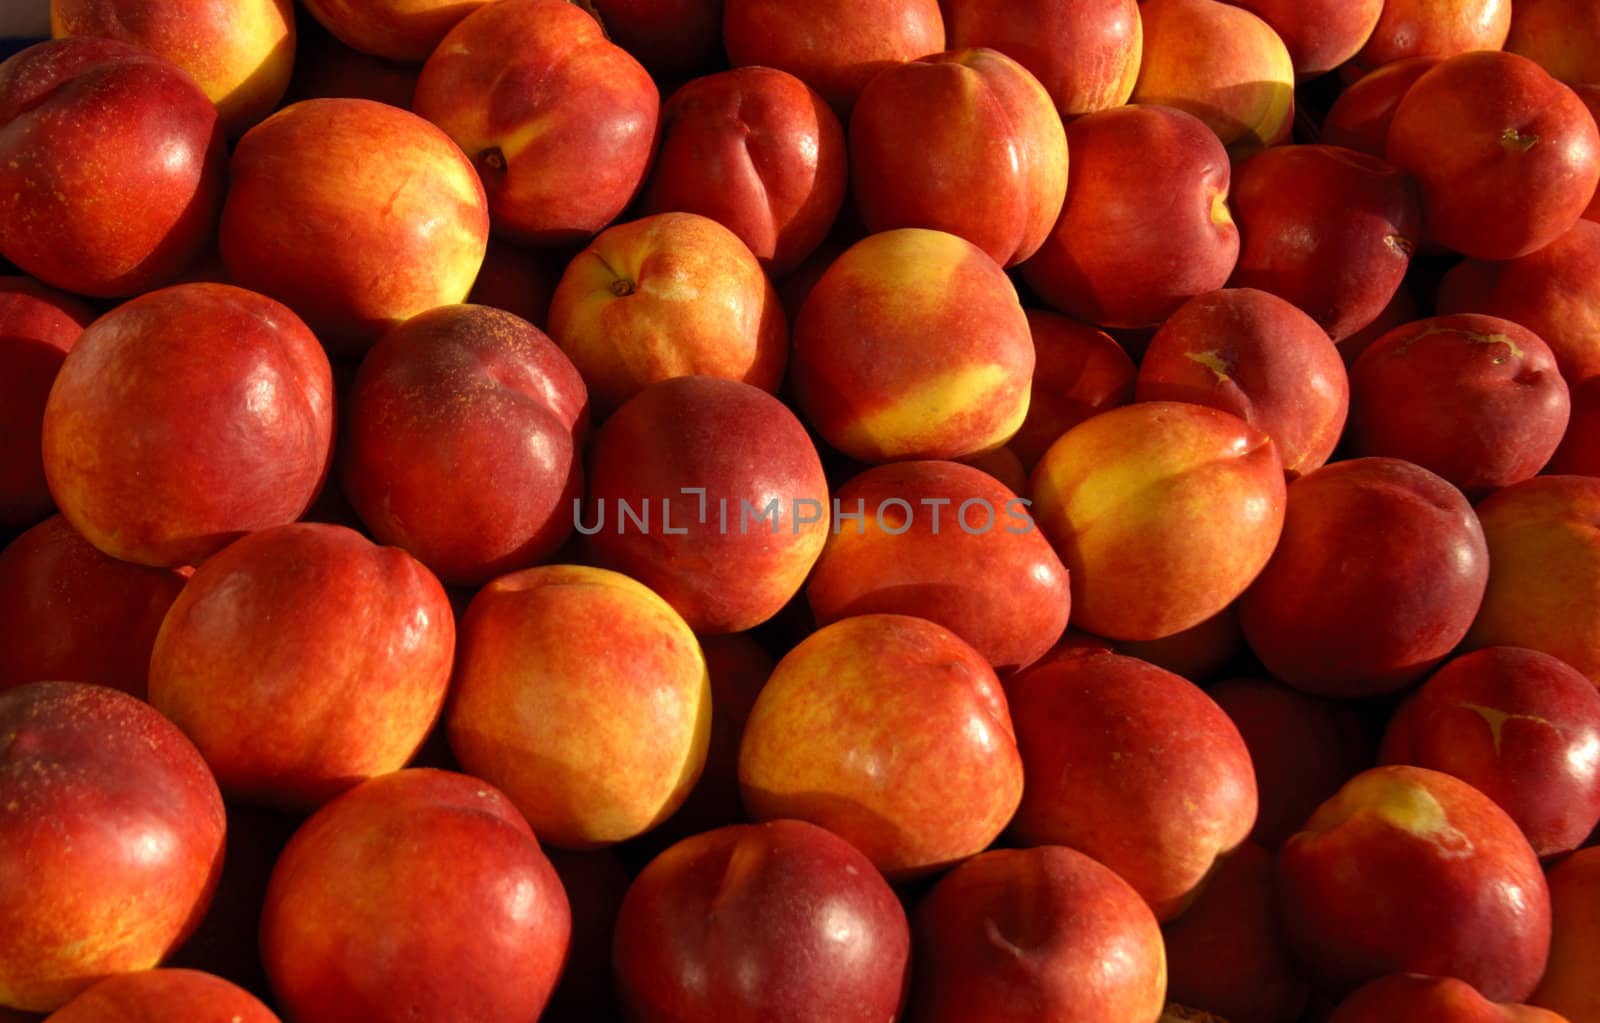 Close-up of ripe peaches on a French market stall, in the early morning light.